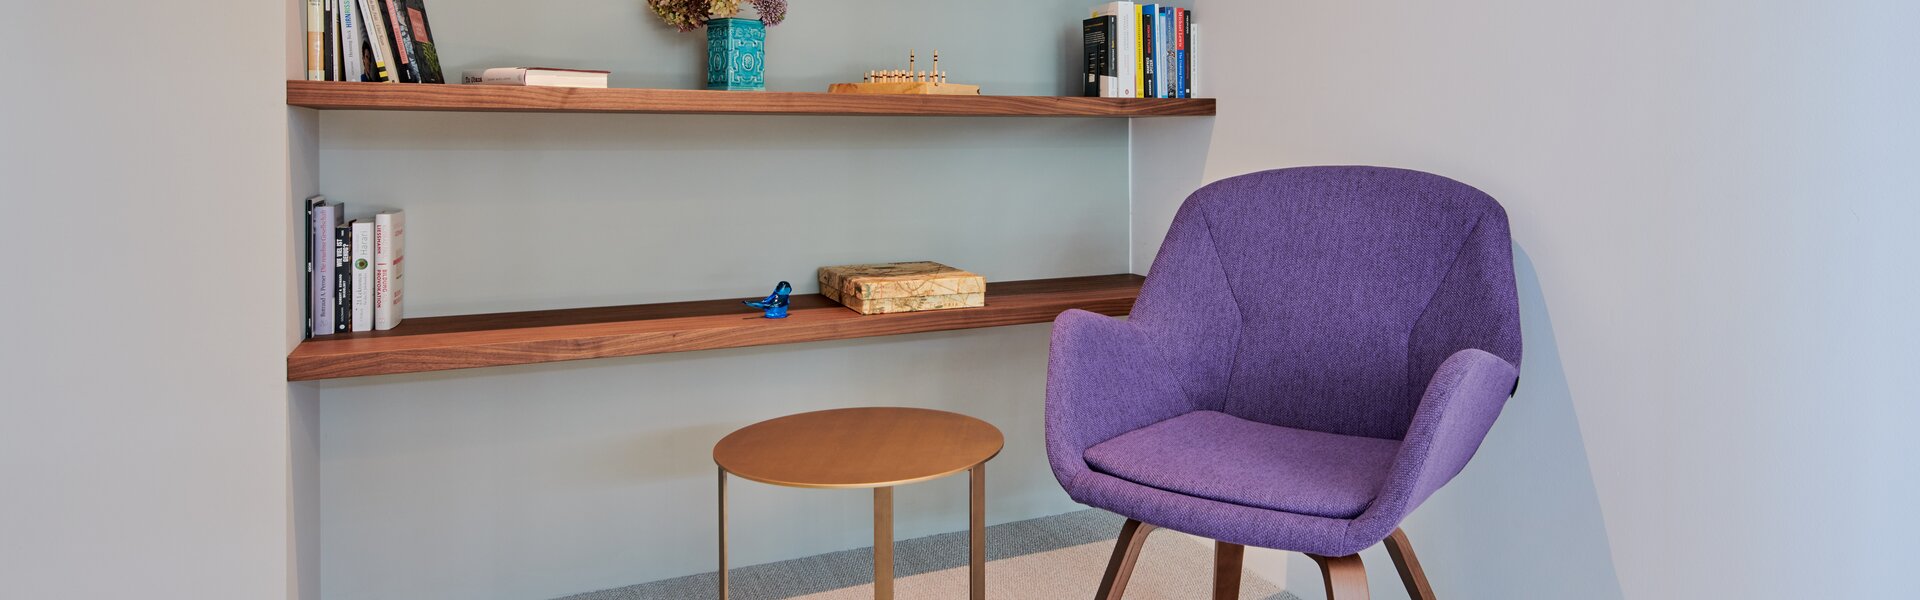 Purple conference chair in front of a wooden bookshelf. | © raumpixel.at